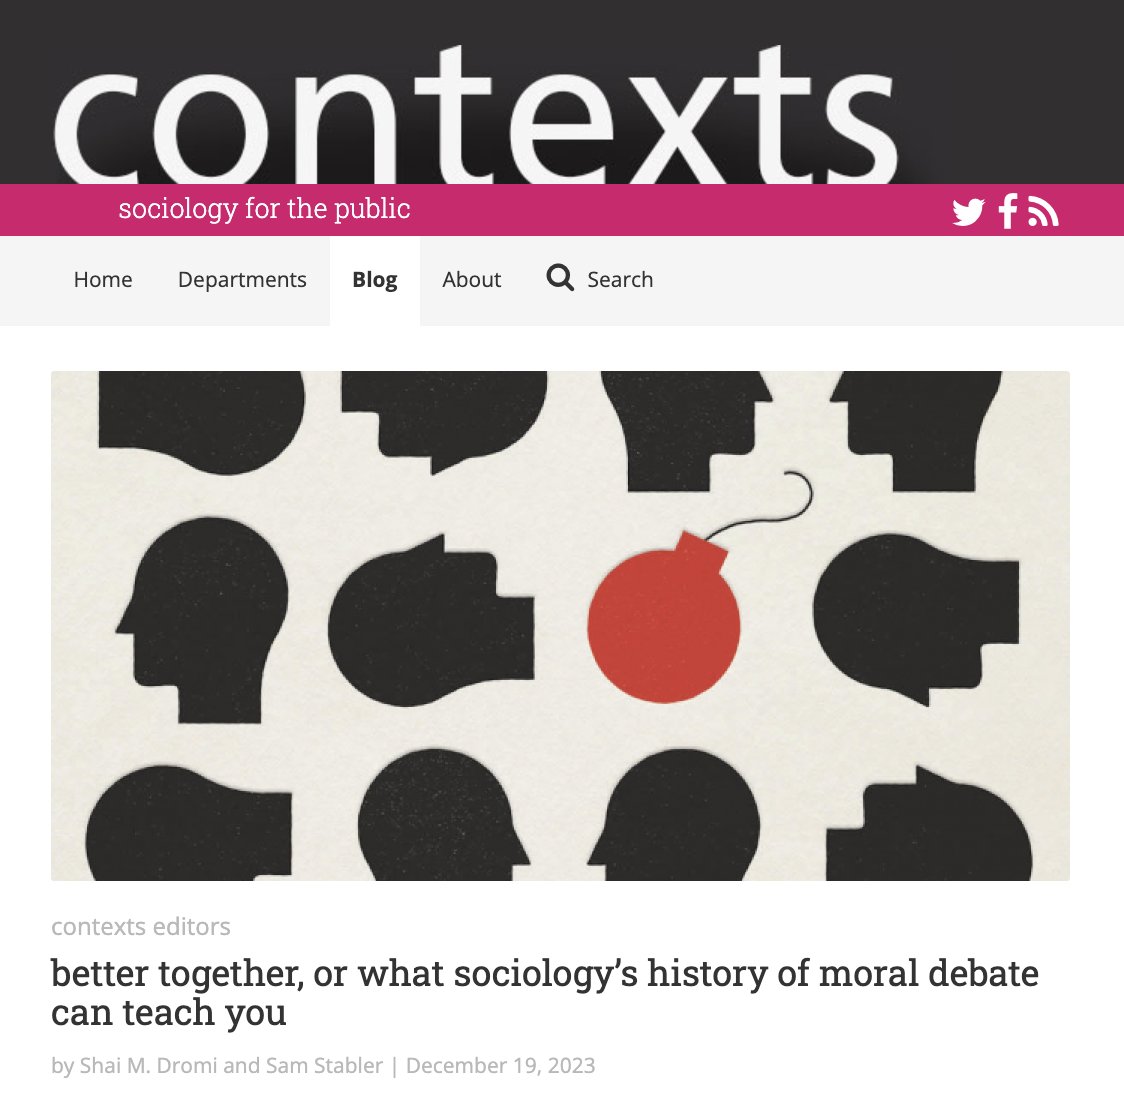 Thanks for writing, @DromiShai & @heavenwasblue !

Check out their latest post for the @contextsmag blog ➡️contexts.org/blog/better-to…

@HarvardSoc @HarvardCulture @CUNY @AMSS_Section